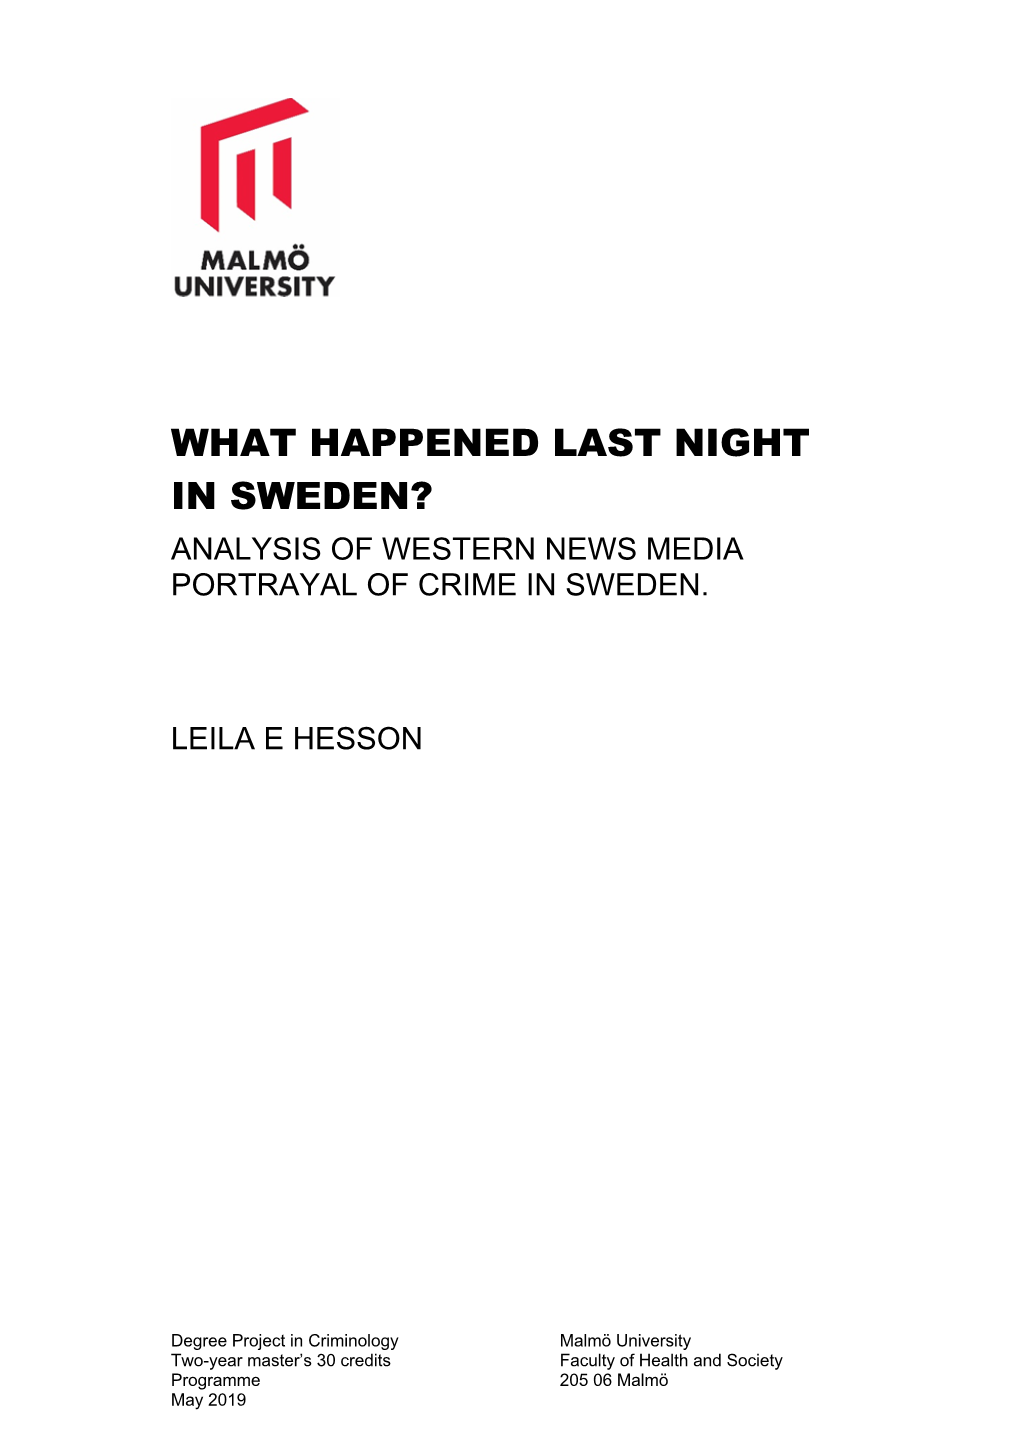 What Happened Last Night in Sweden? Analysis of Western News Media Portrayal of Crime in Sweden